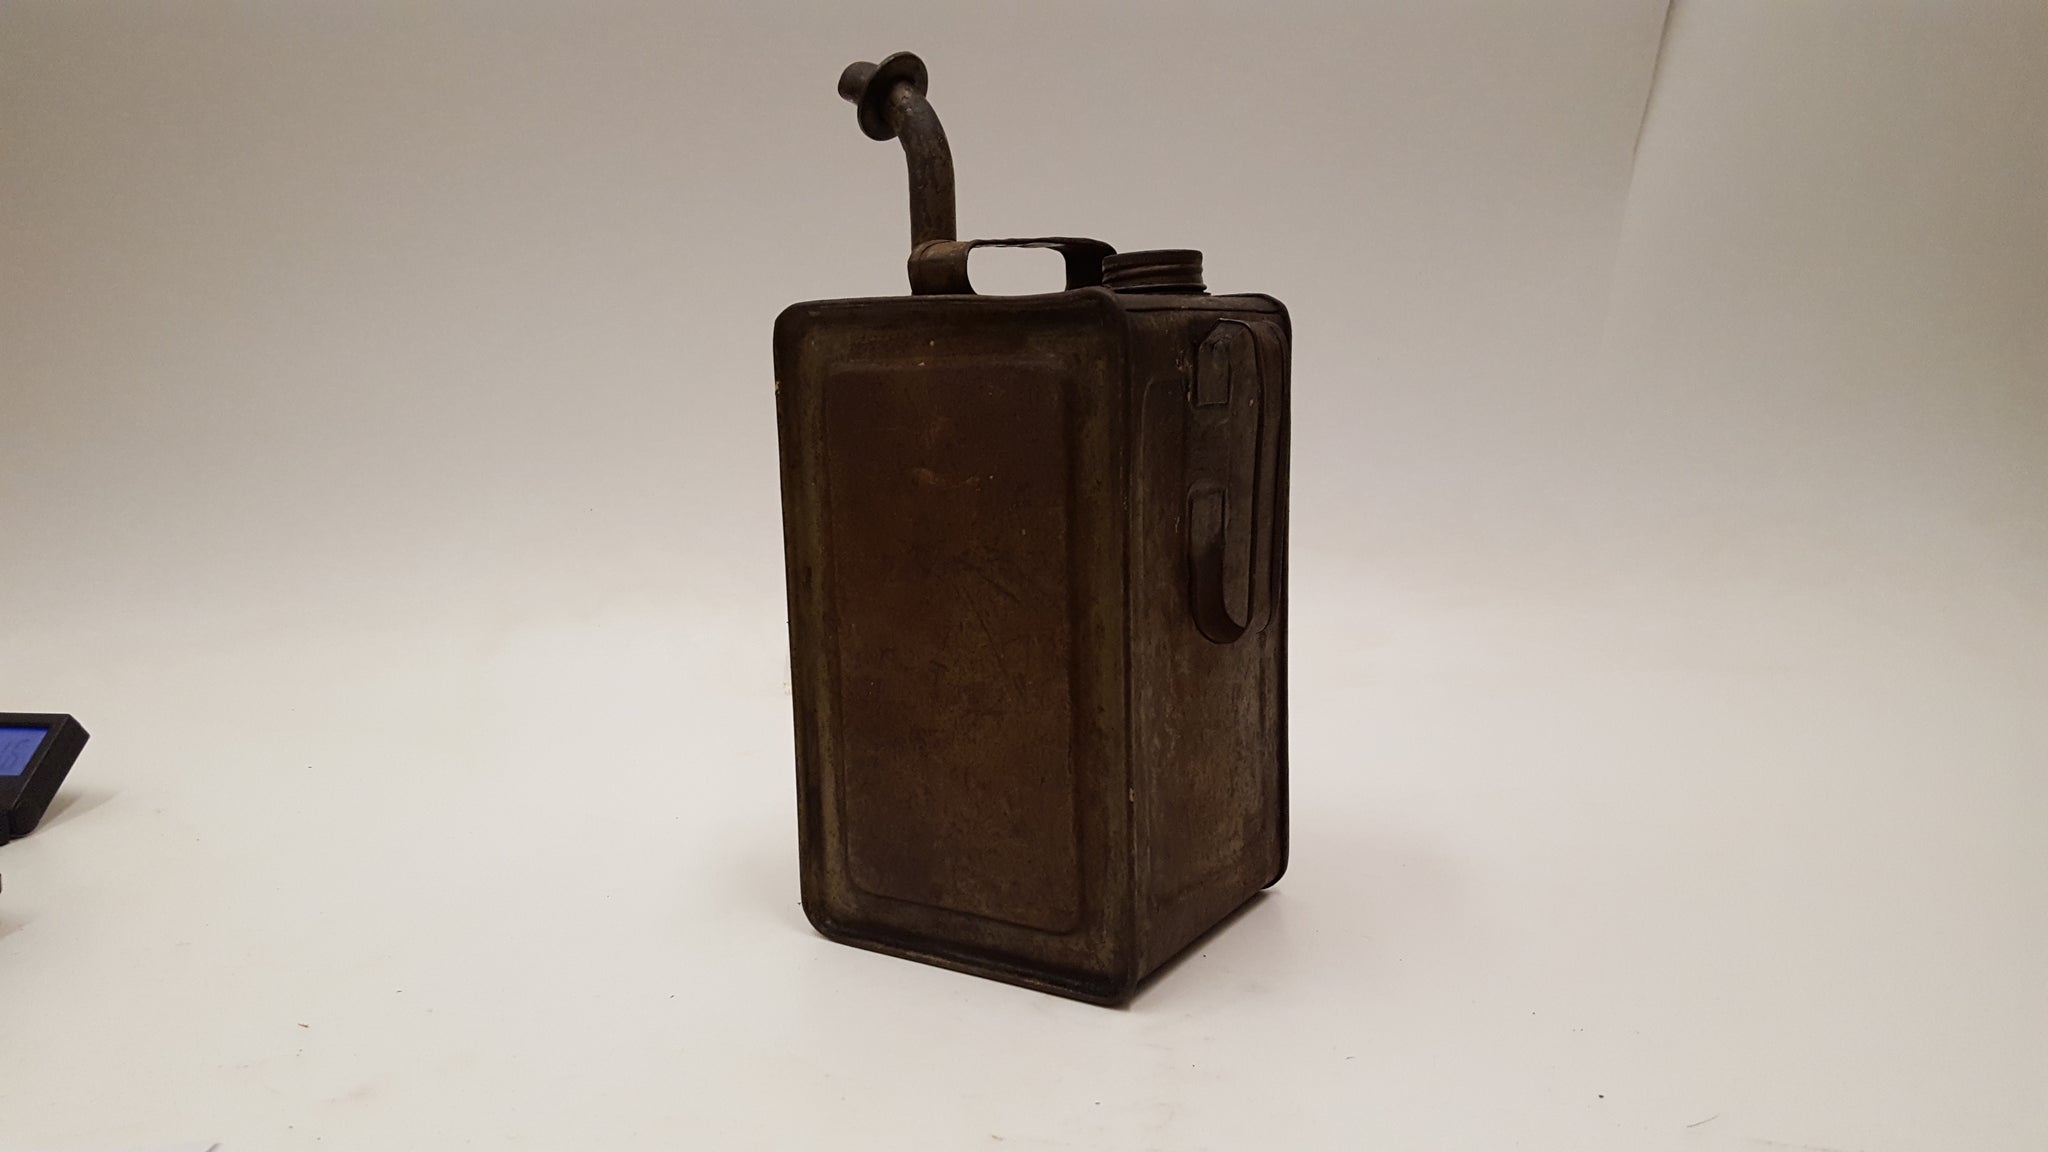 Nice 10" x 6" x 5 1/2" Vintage Red Paraffin Jerry Can 35269